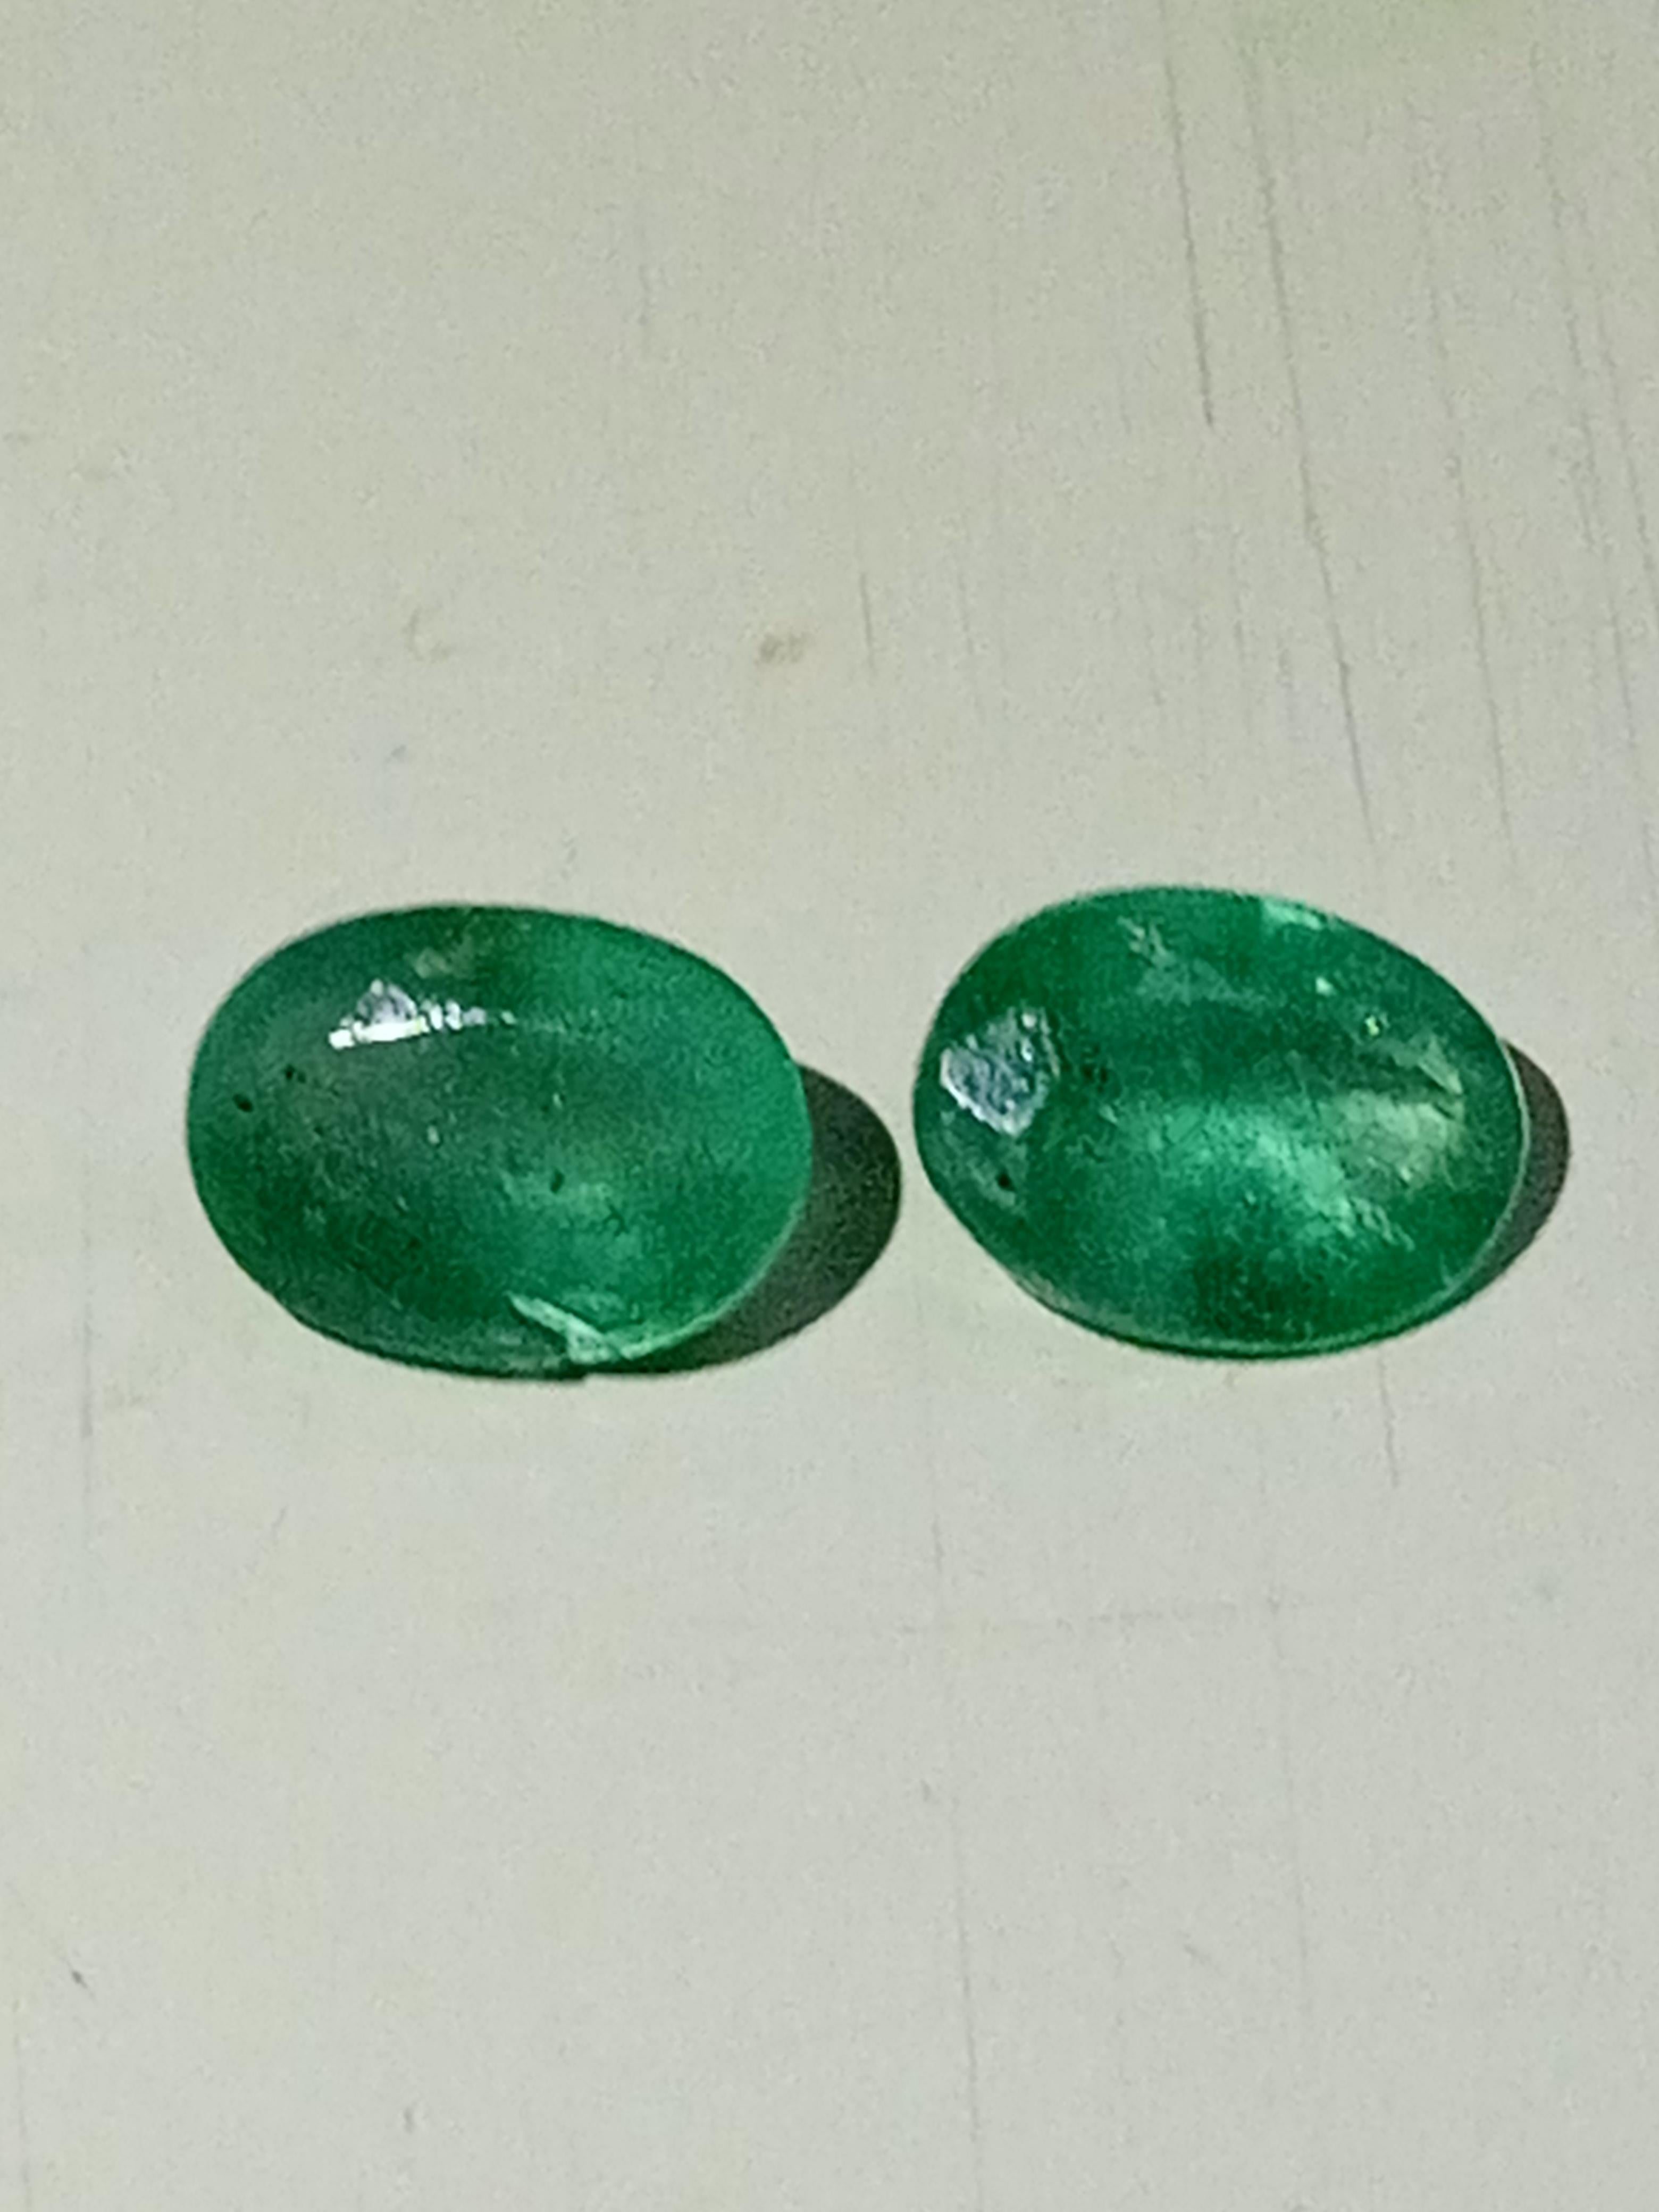 Natural Zambia emerald pair 3.7 carats - Sculpture by Unknown